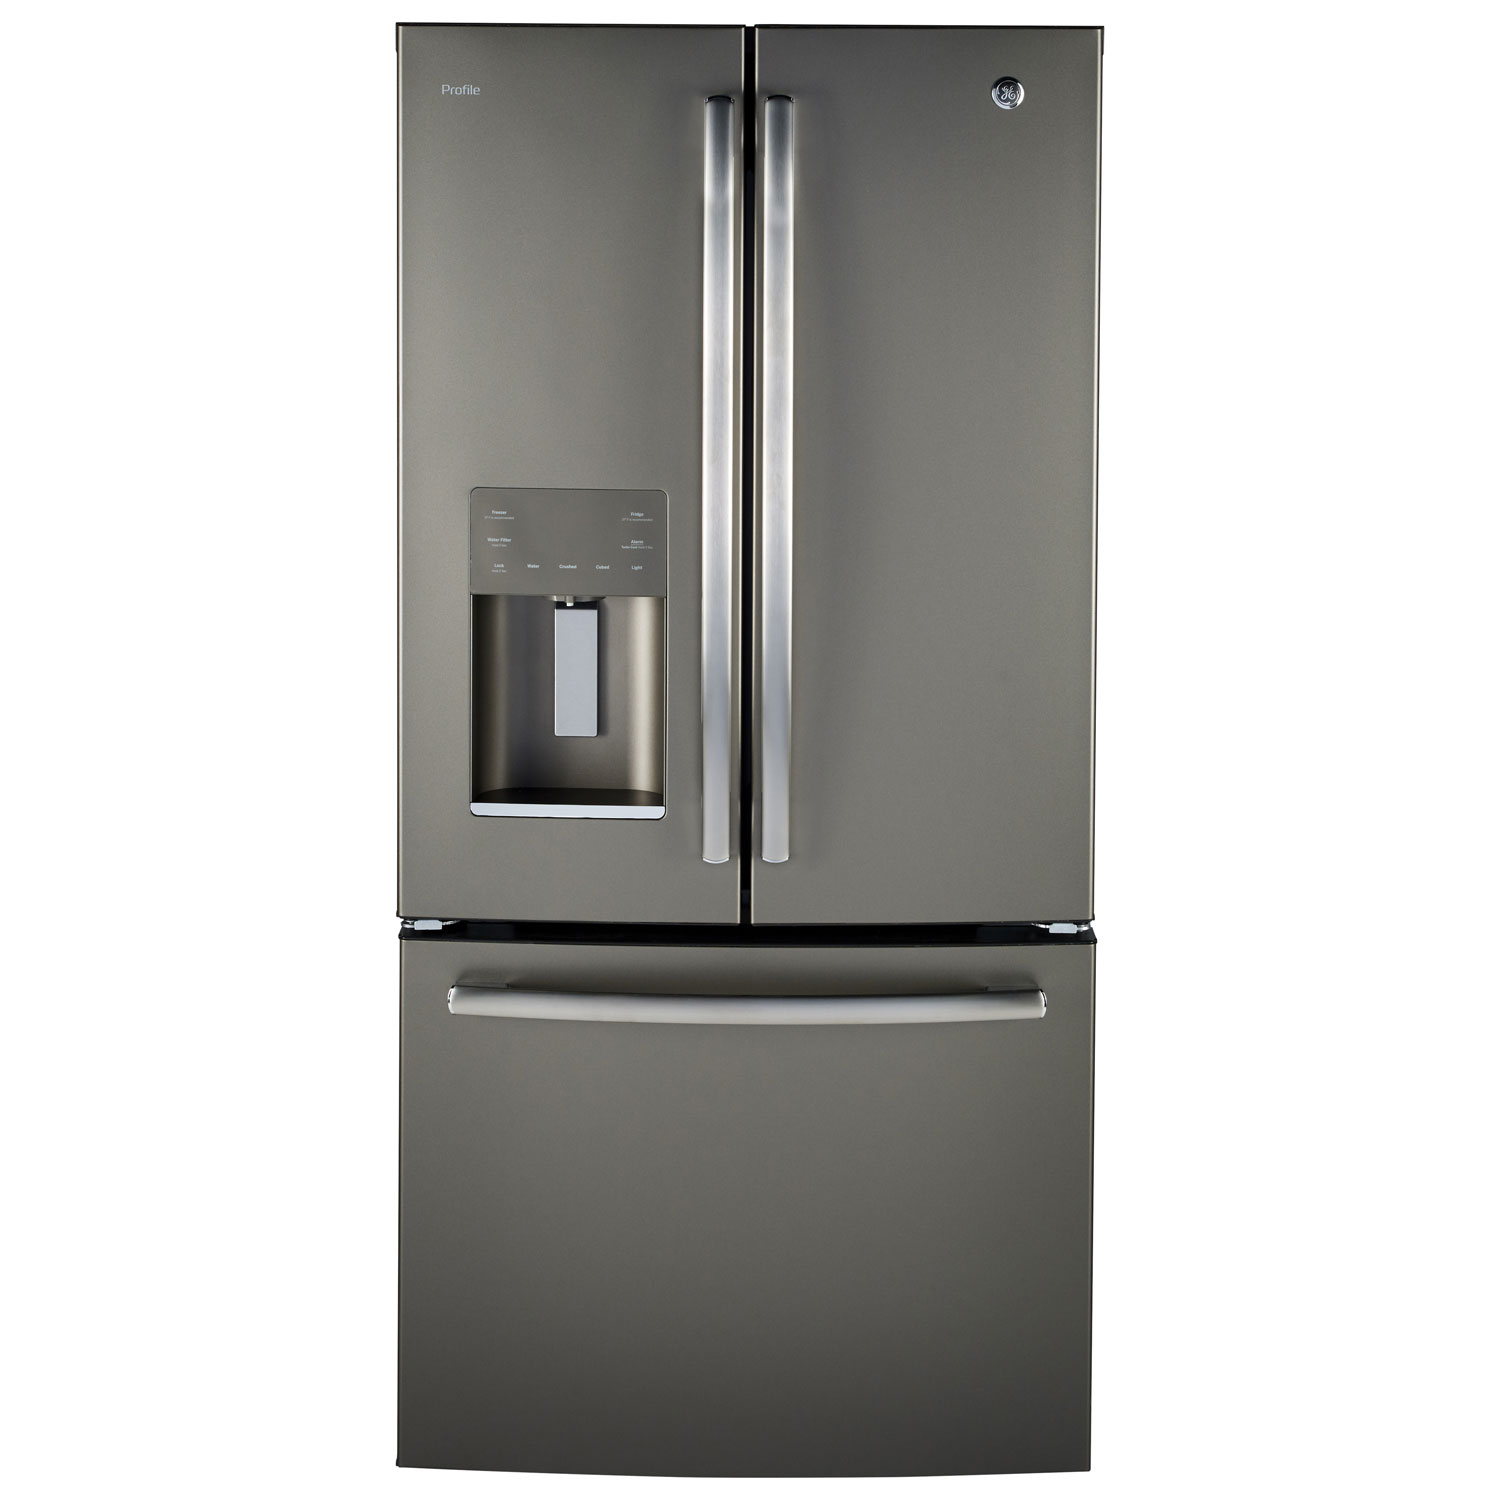 GE Profile 33" 23.8 Cu. Ft. French Door Refrigerator with LED Lighting (PFE24HMLKES) - Slate